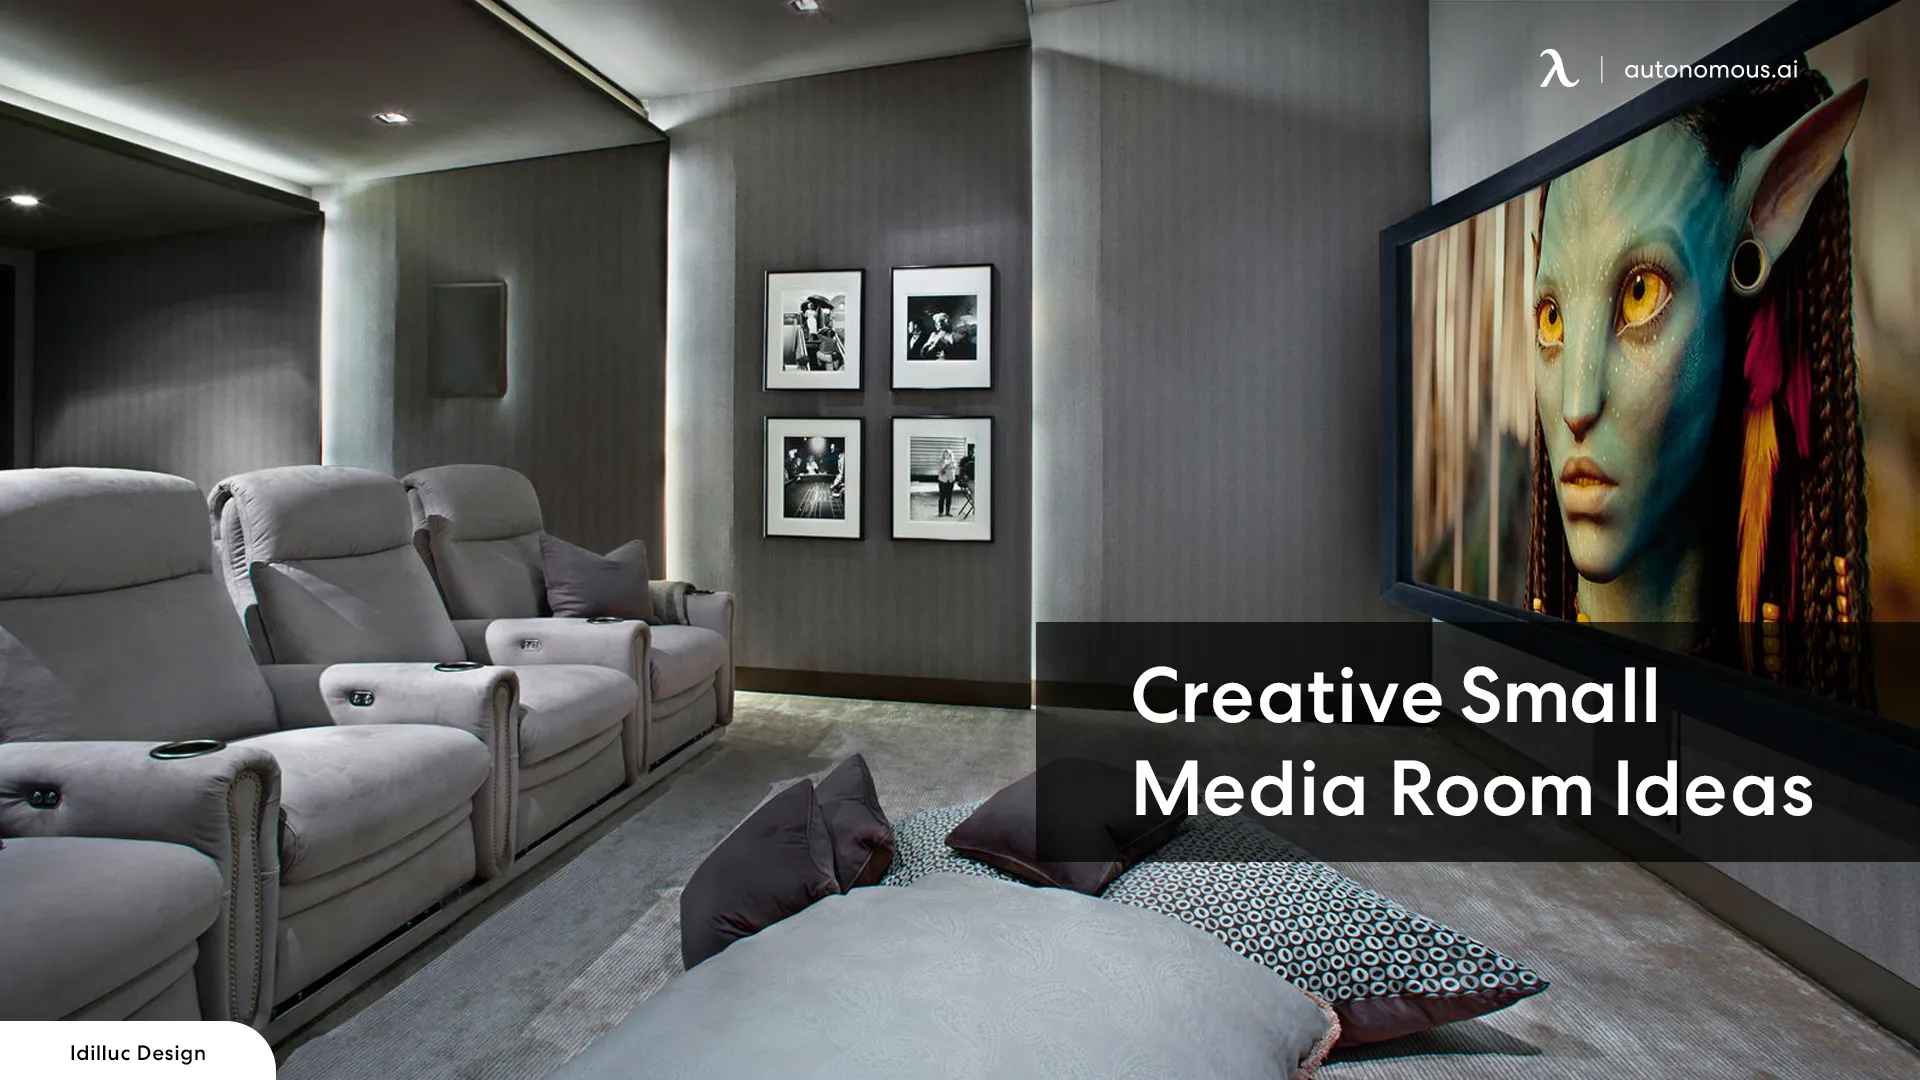 Small Media Room Inspiration to Make the Most of Your Cozy Space